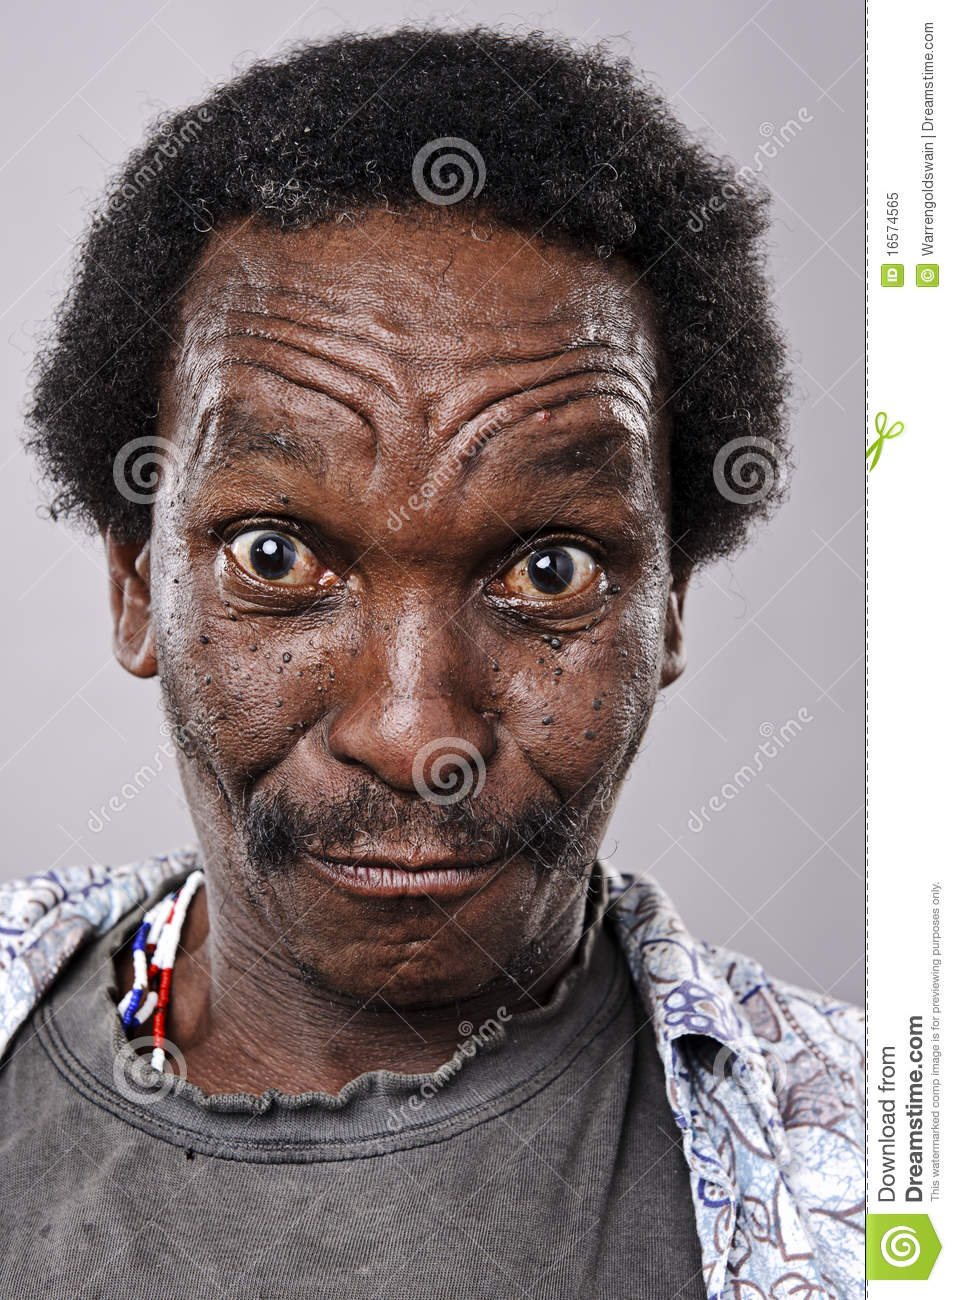 Silly Funny Face Royalty Free Stock Photo   Image  16574565